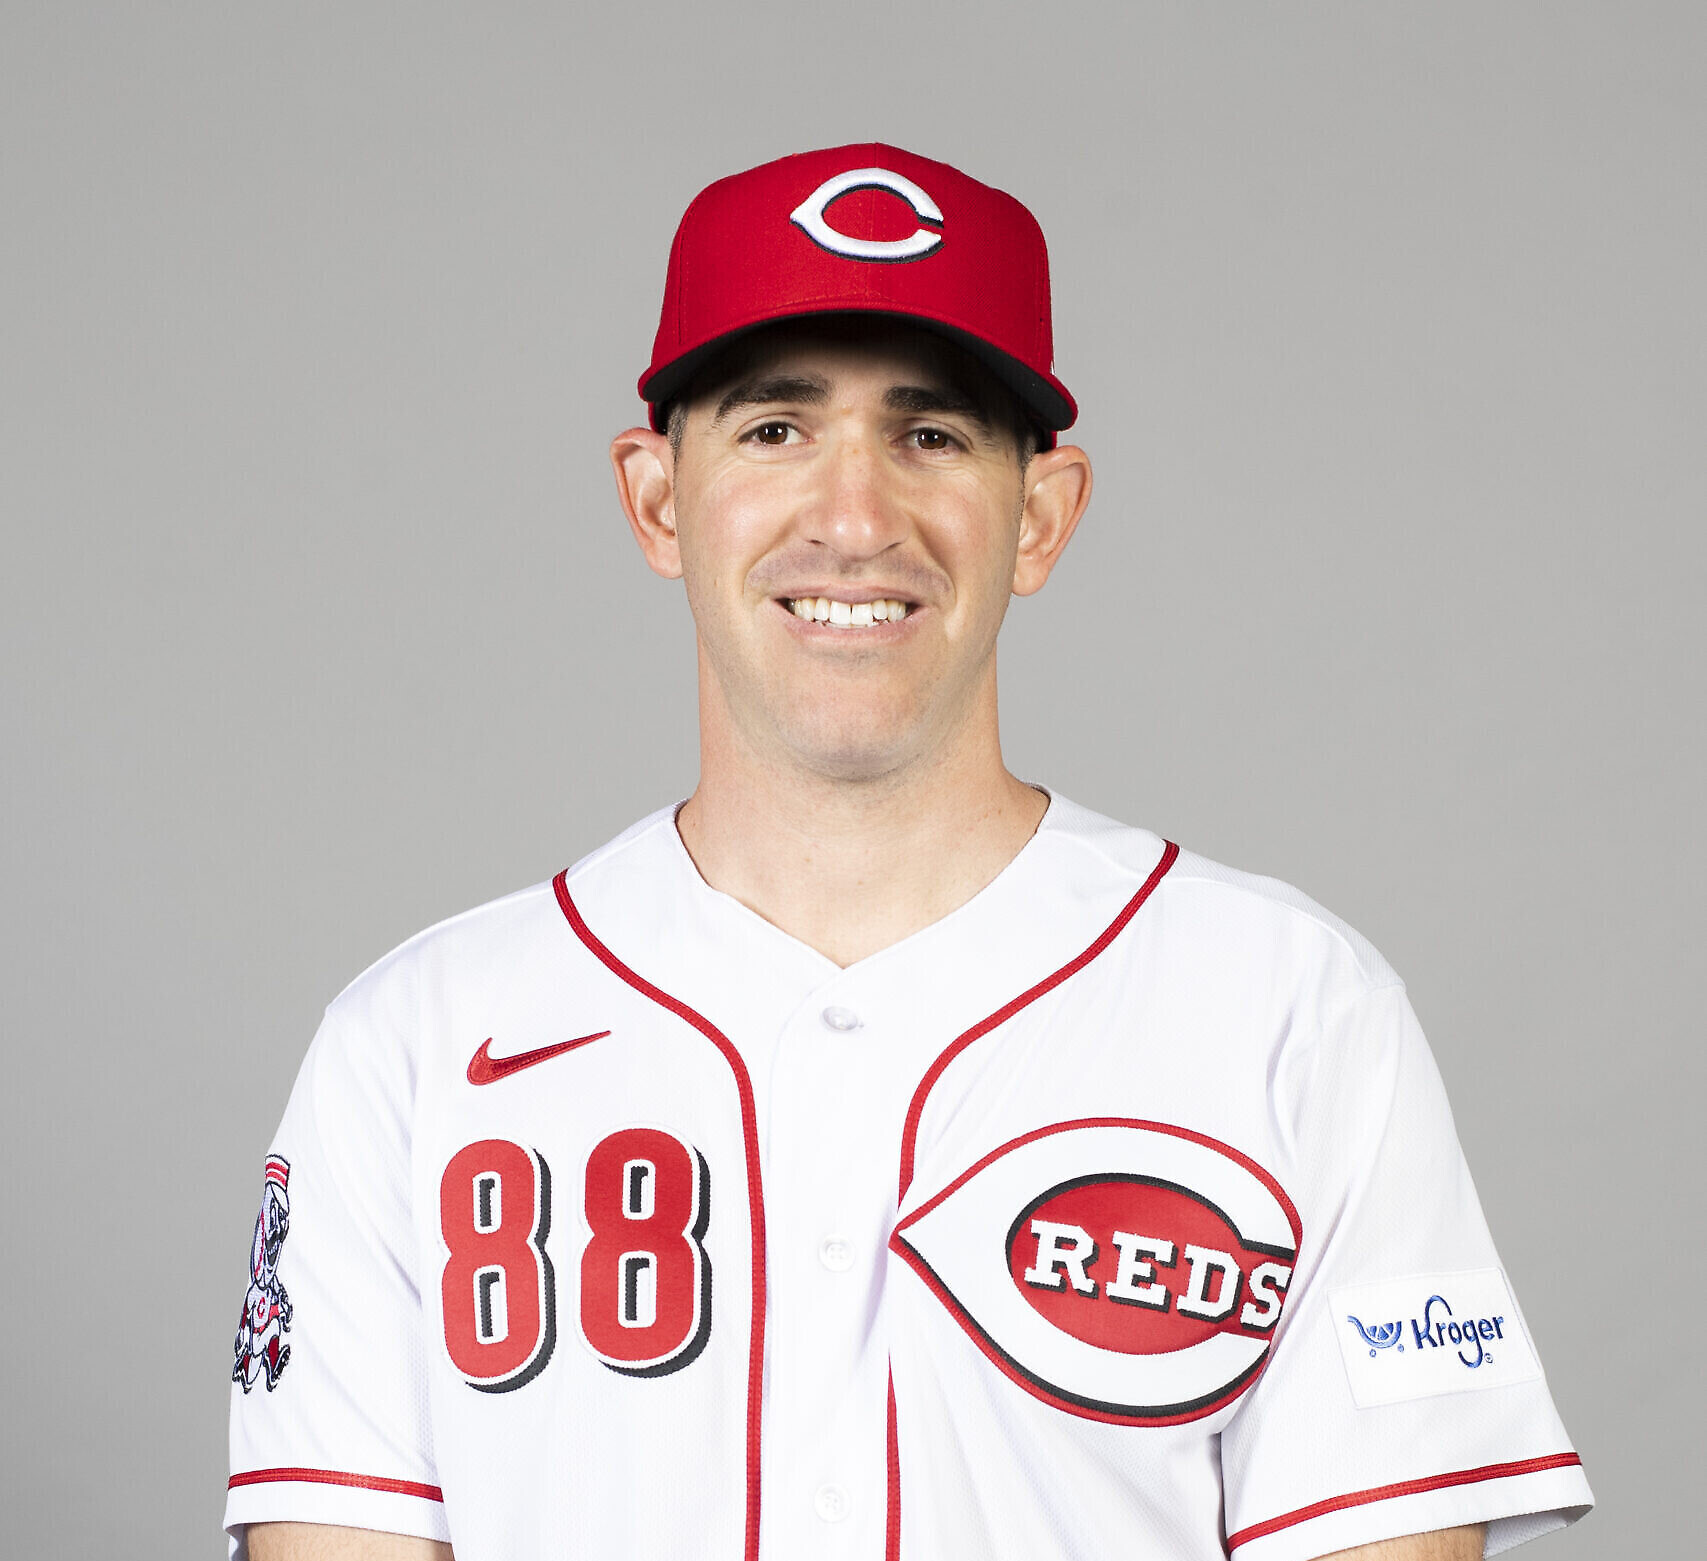 Reds uniforms to now include Kroger logo